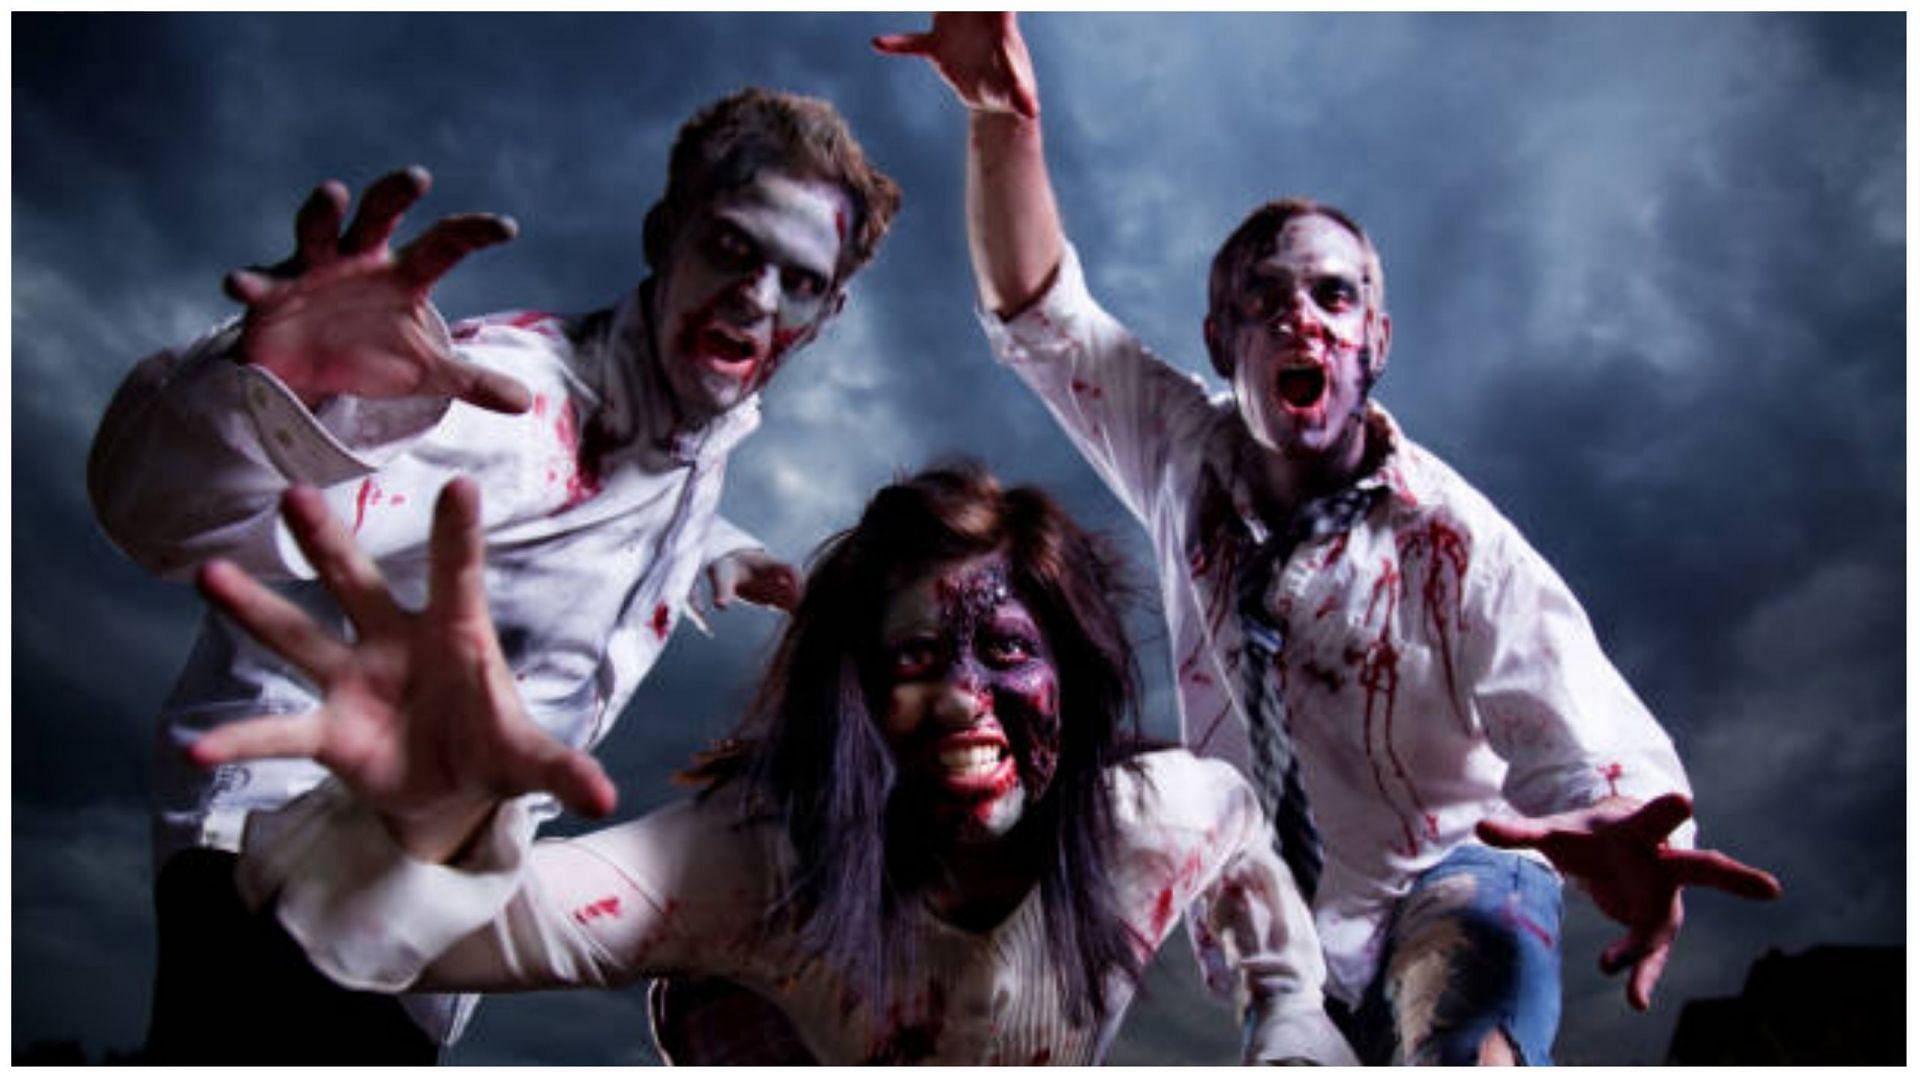 TikTokers fear China has zombies (Image via DanielBendjy/Getty Images)